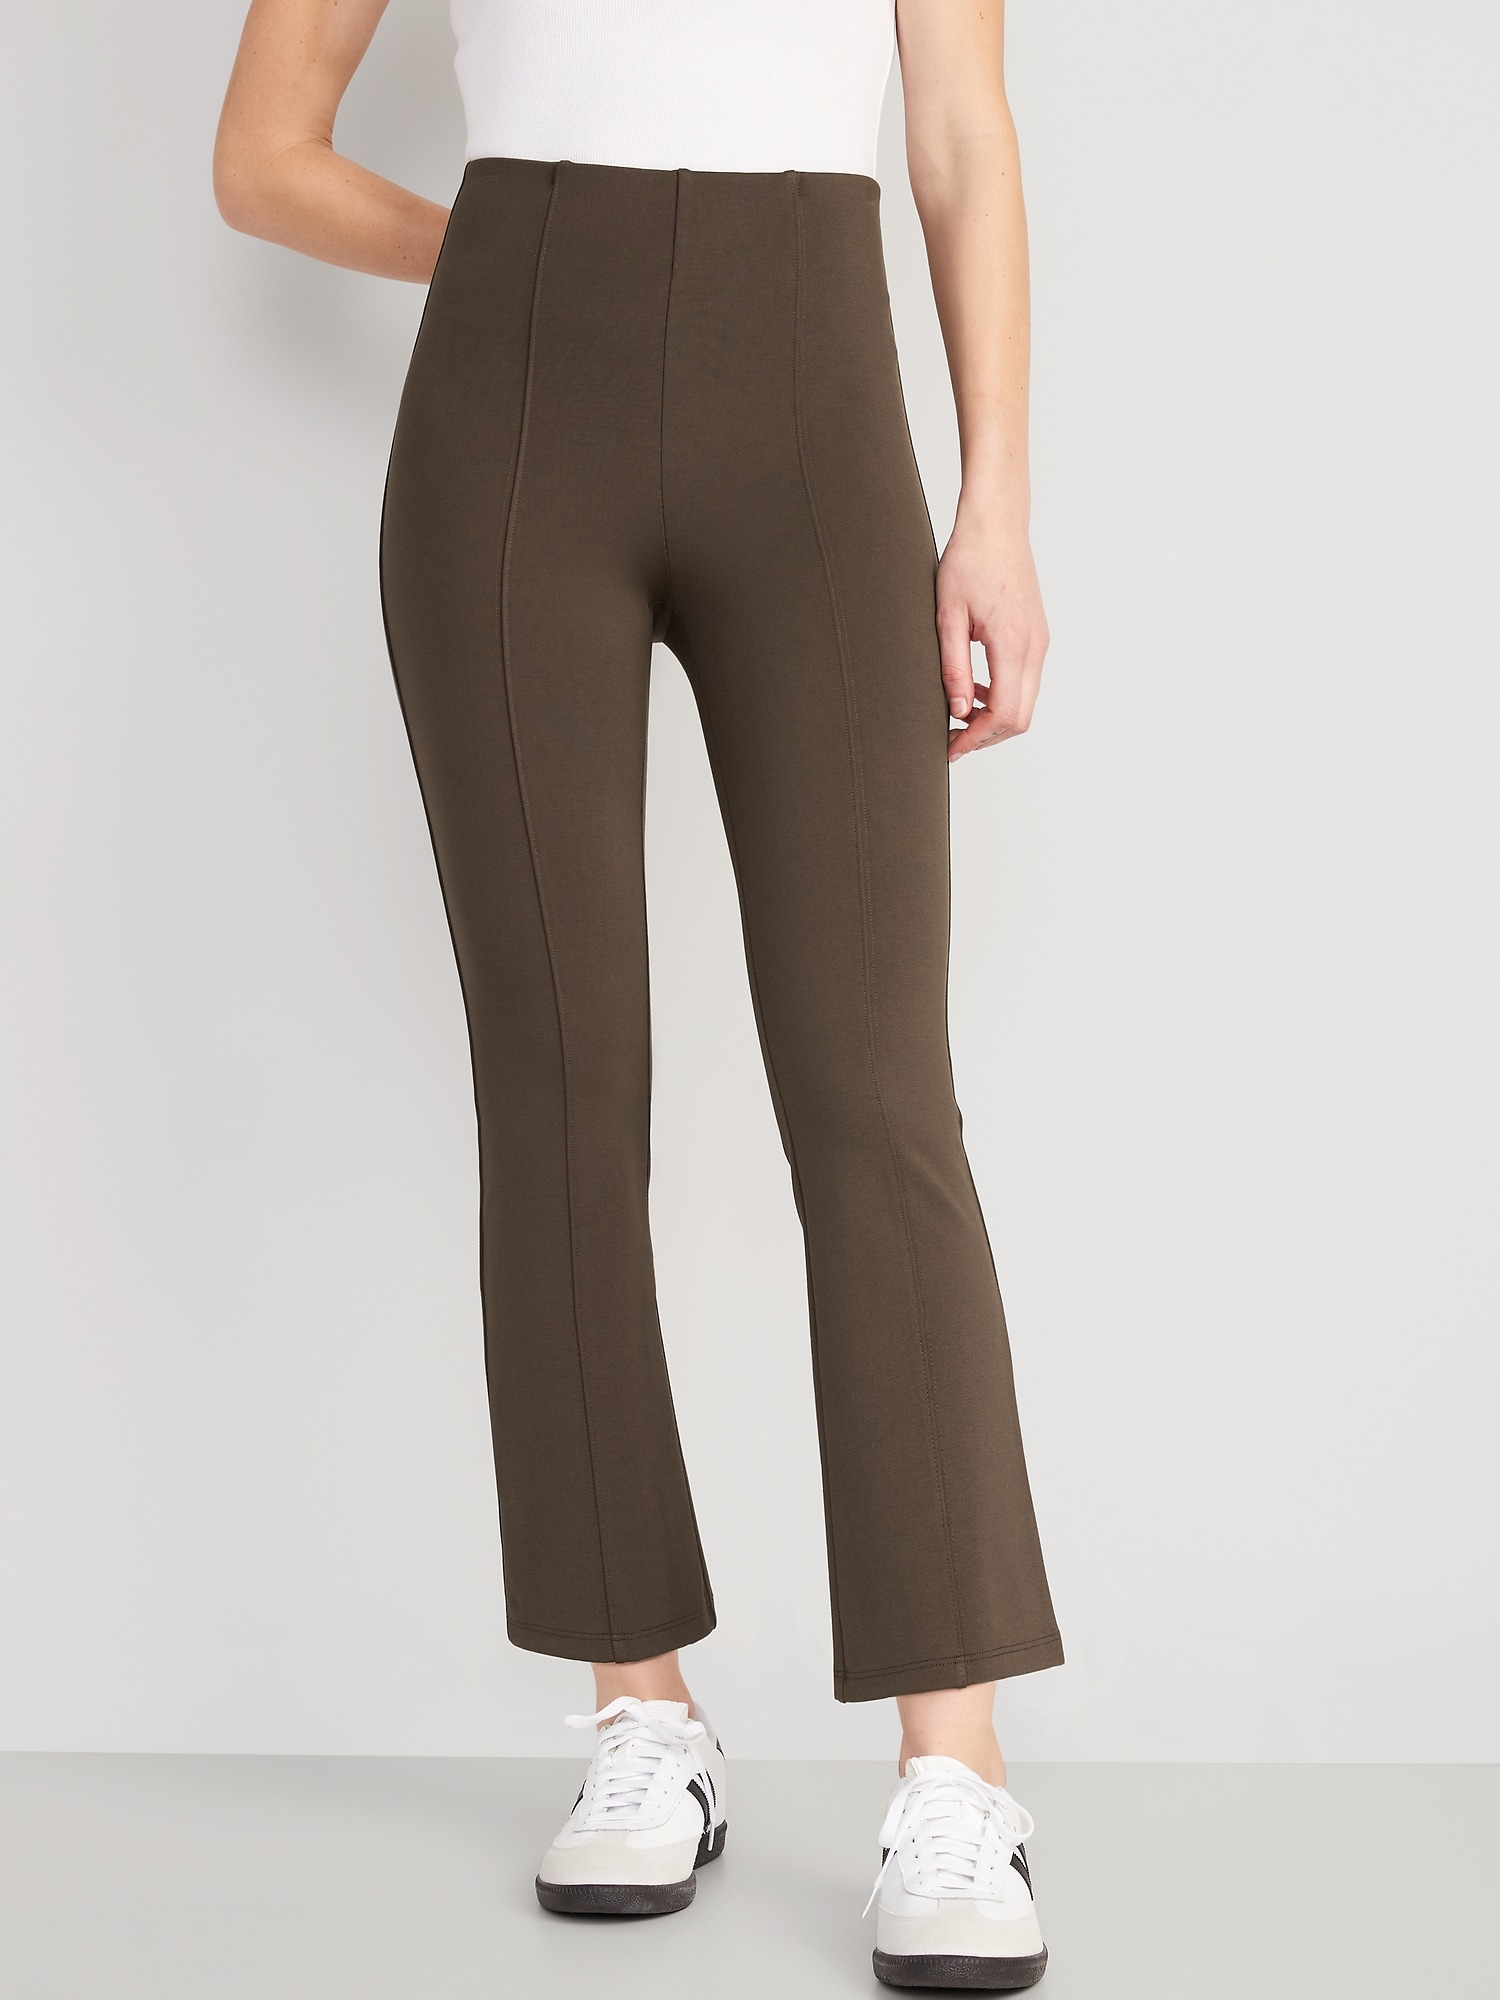 High-Waisted Stevie Ponte-Knit Pants for Women